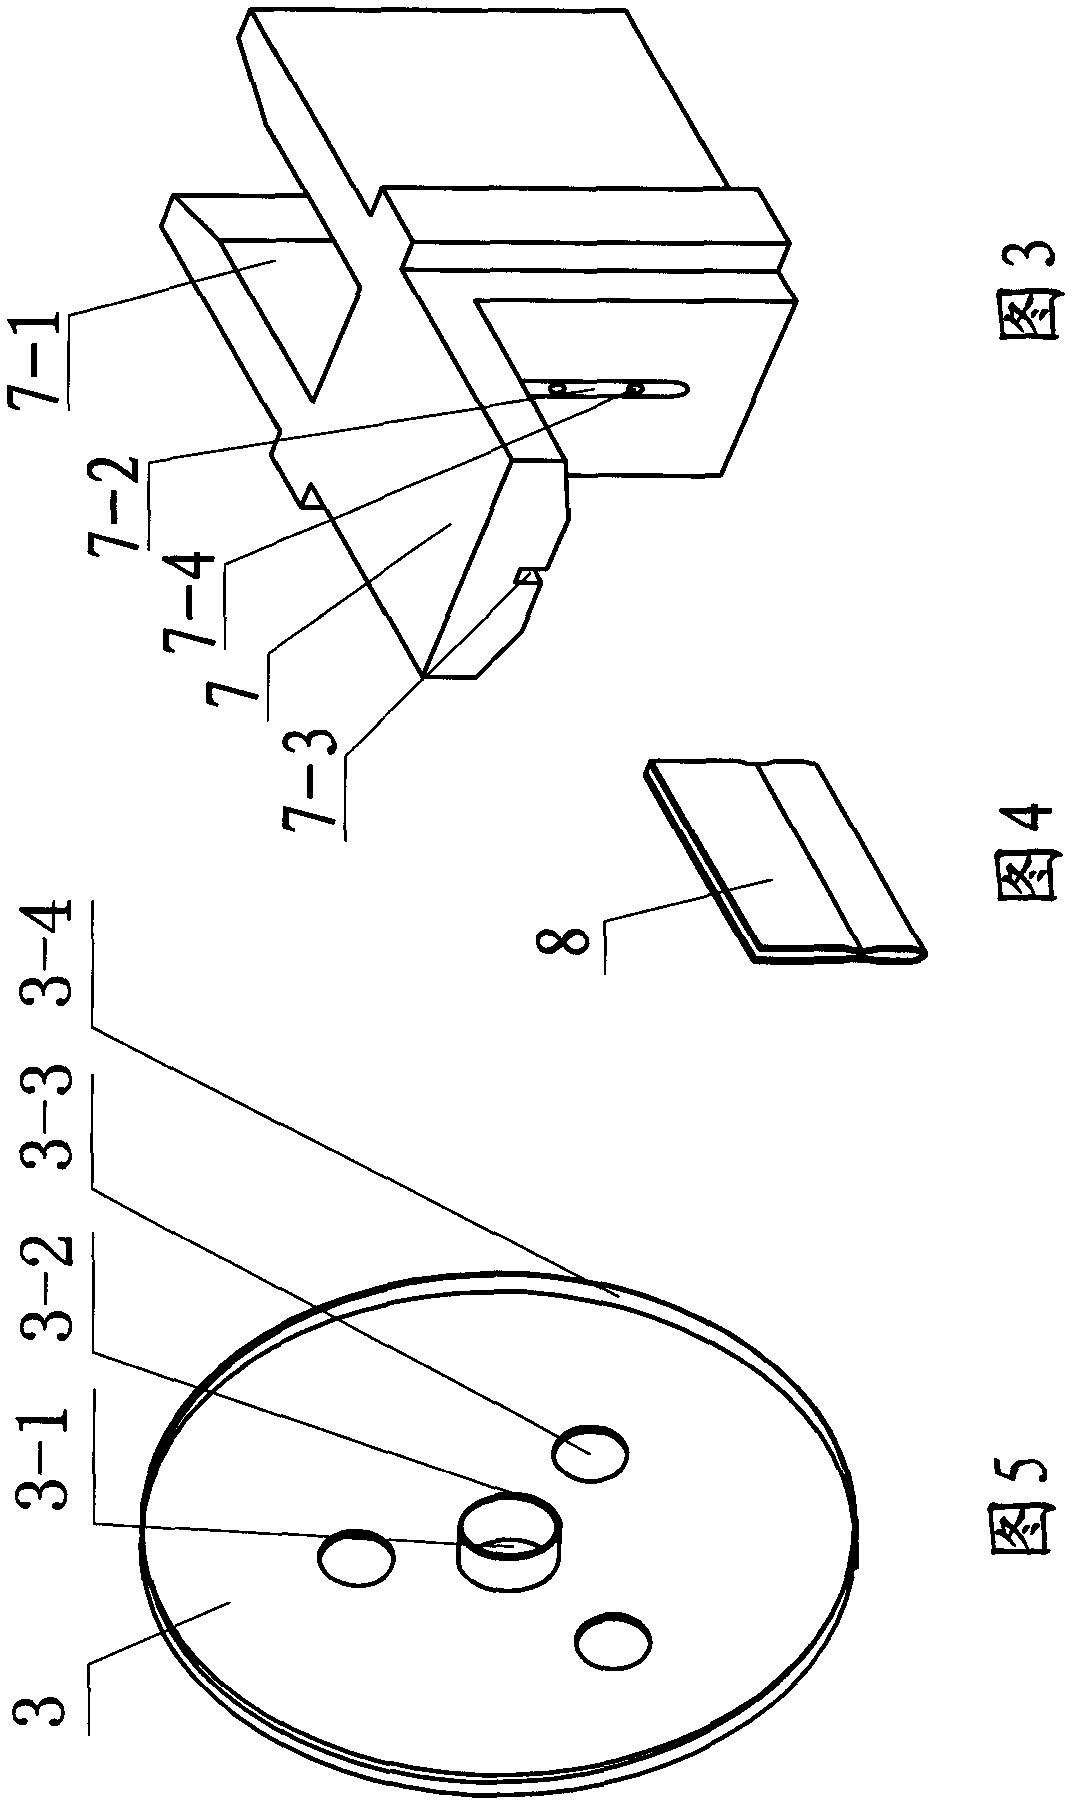 Double-ended high-power gas discharge lamp